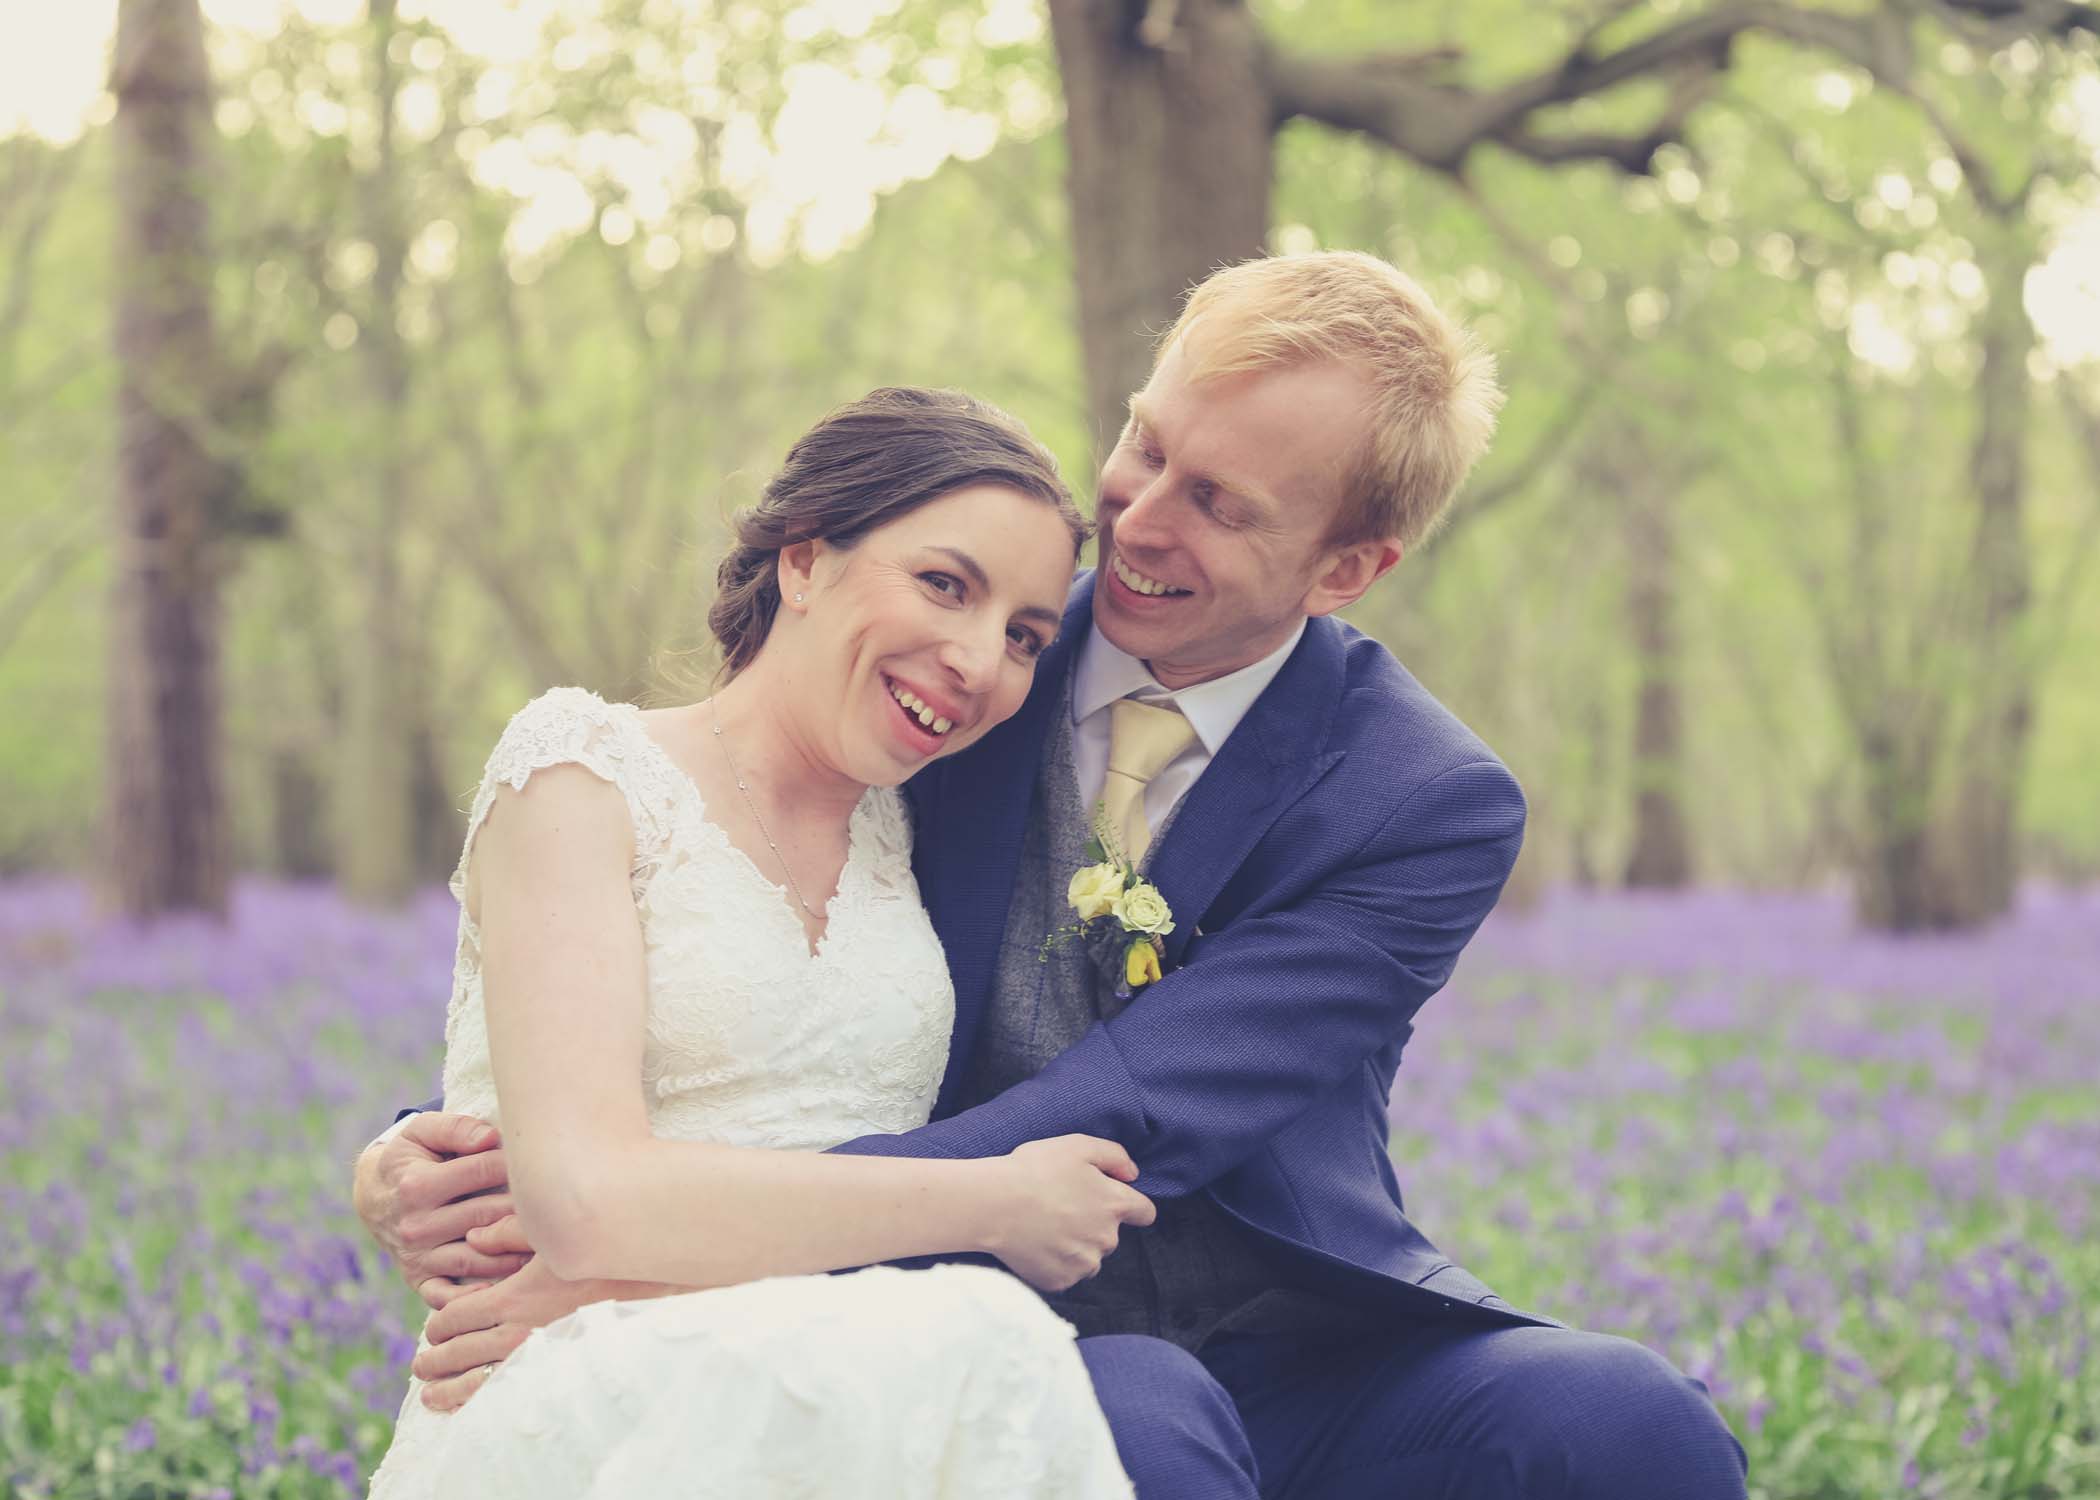 A bride and a groom together in a bluebell wood on their wedding day at Haughley Park Barn Wedding Venue photographed by Hayley Denston Photography